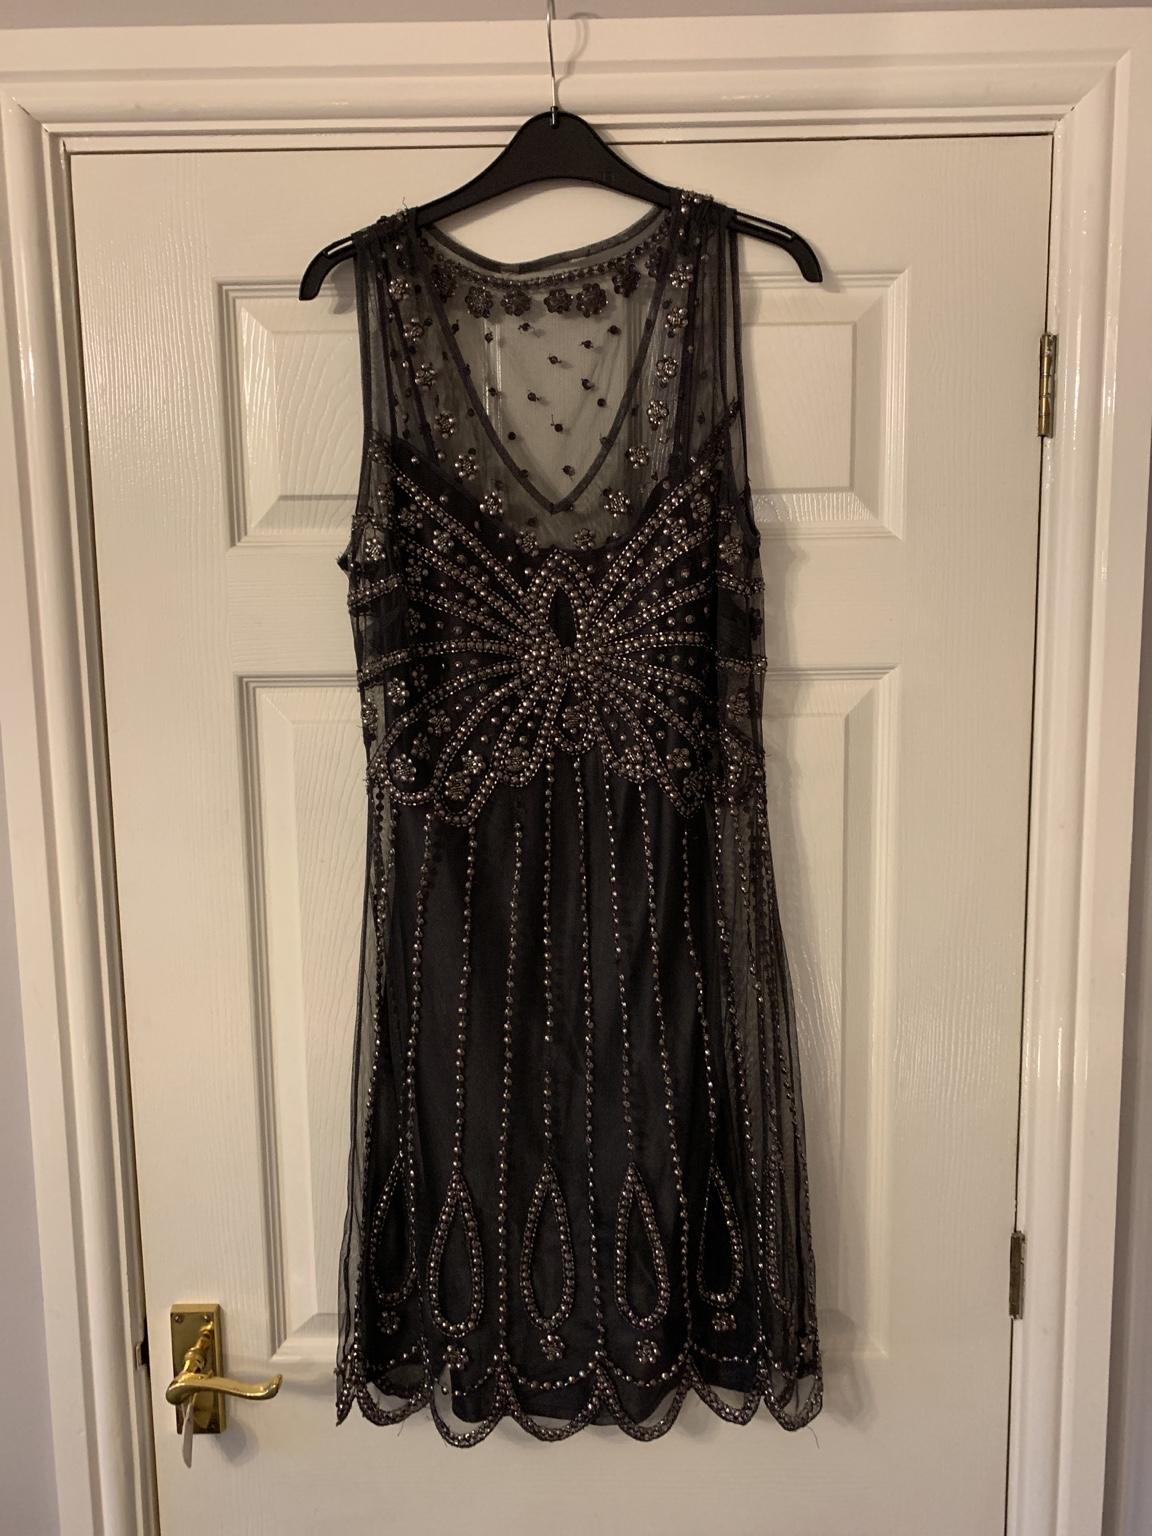 10 year girl party dress